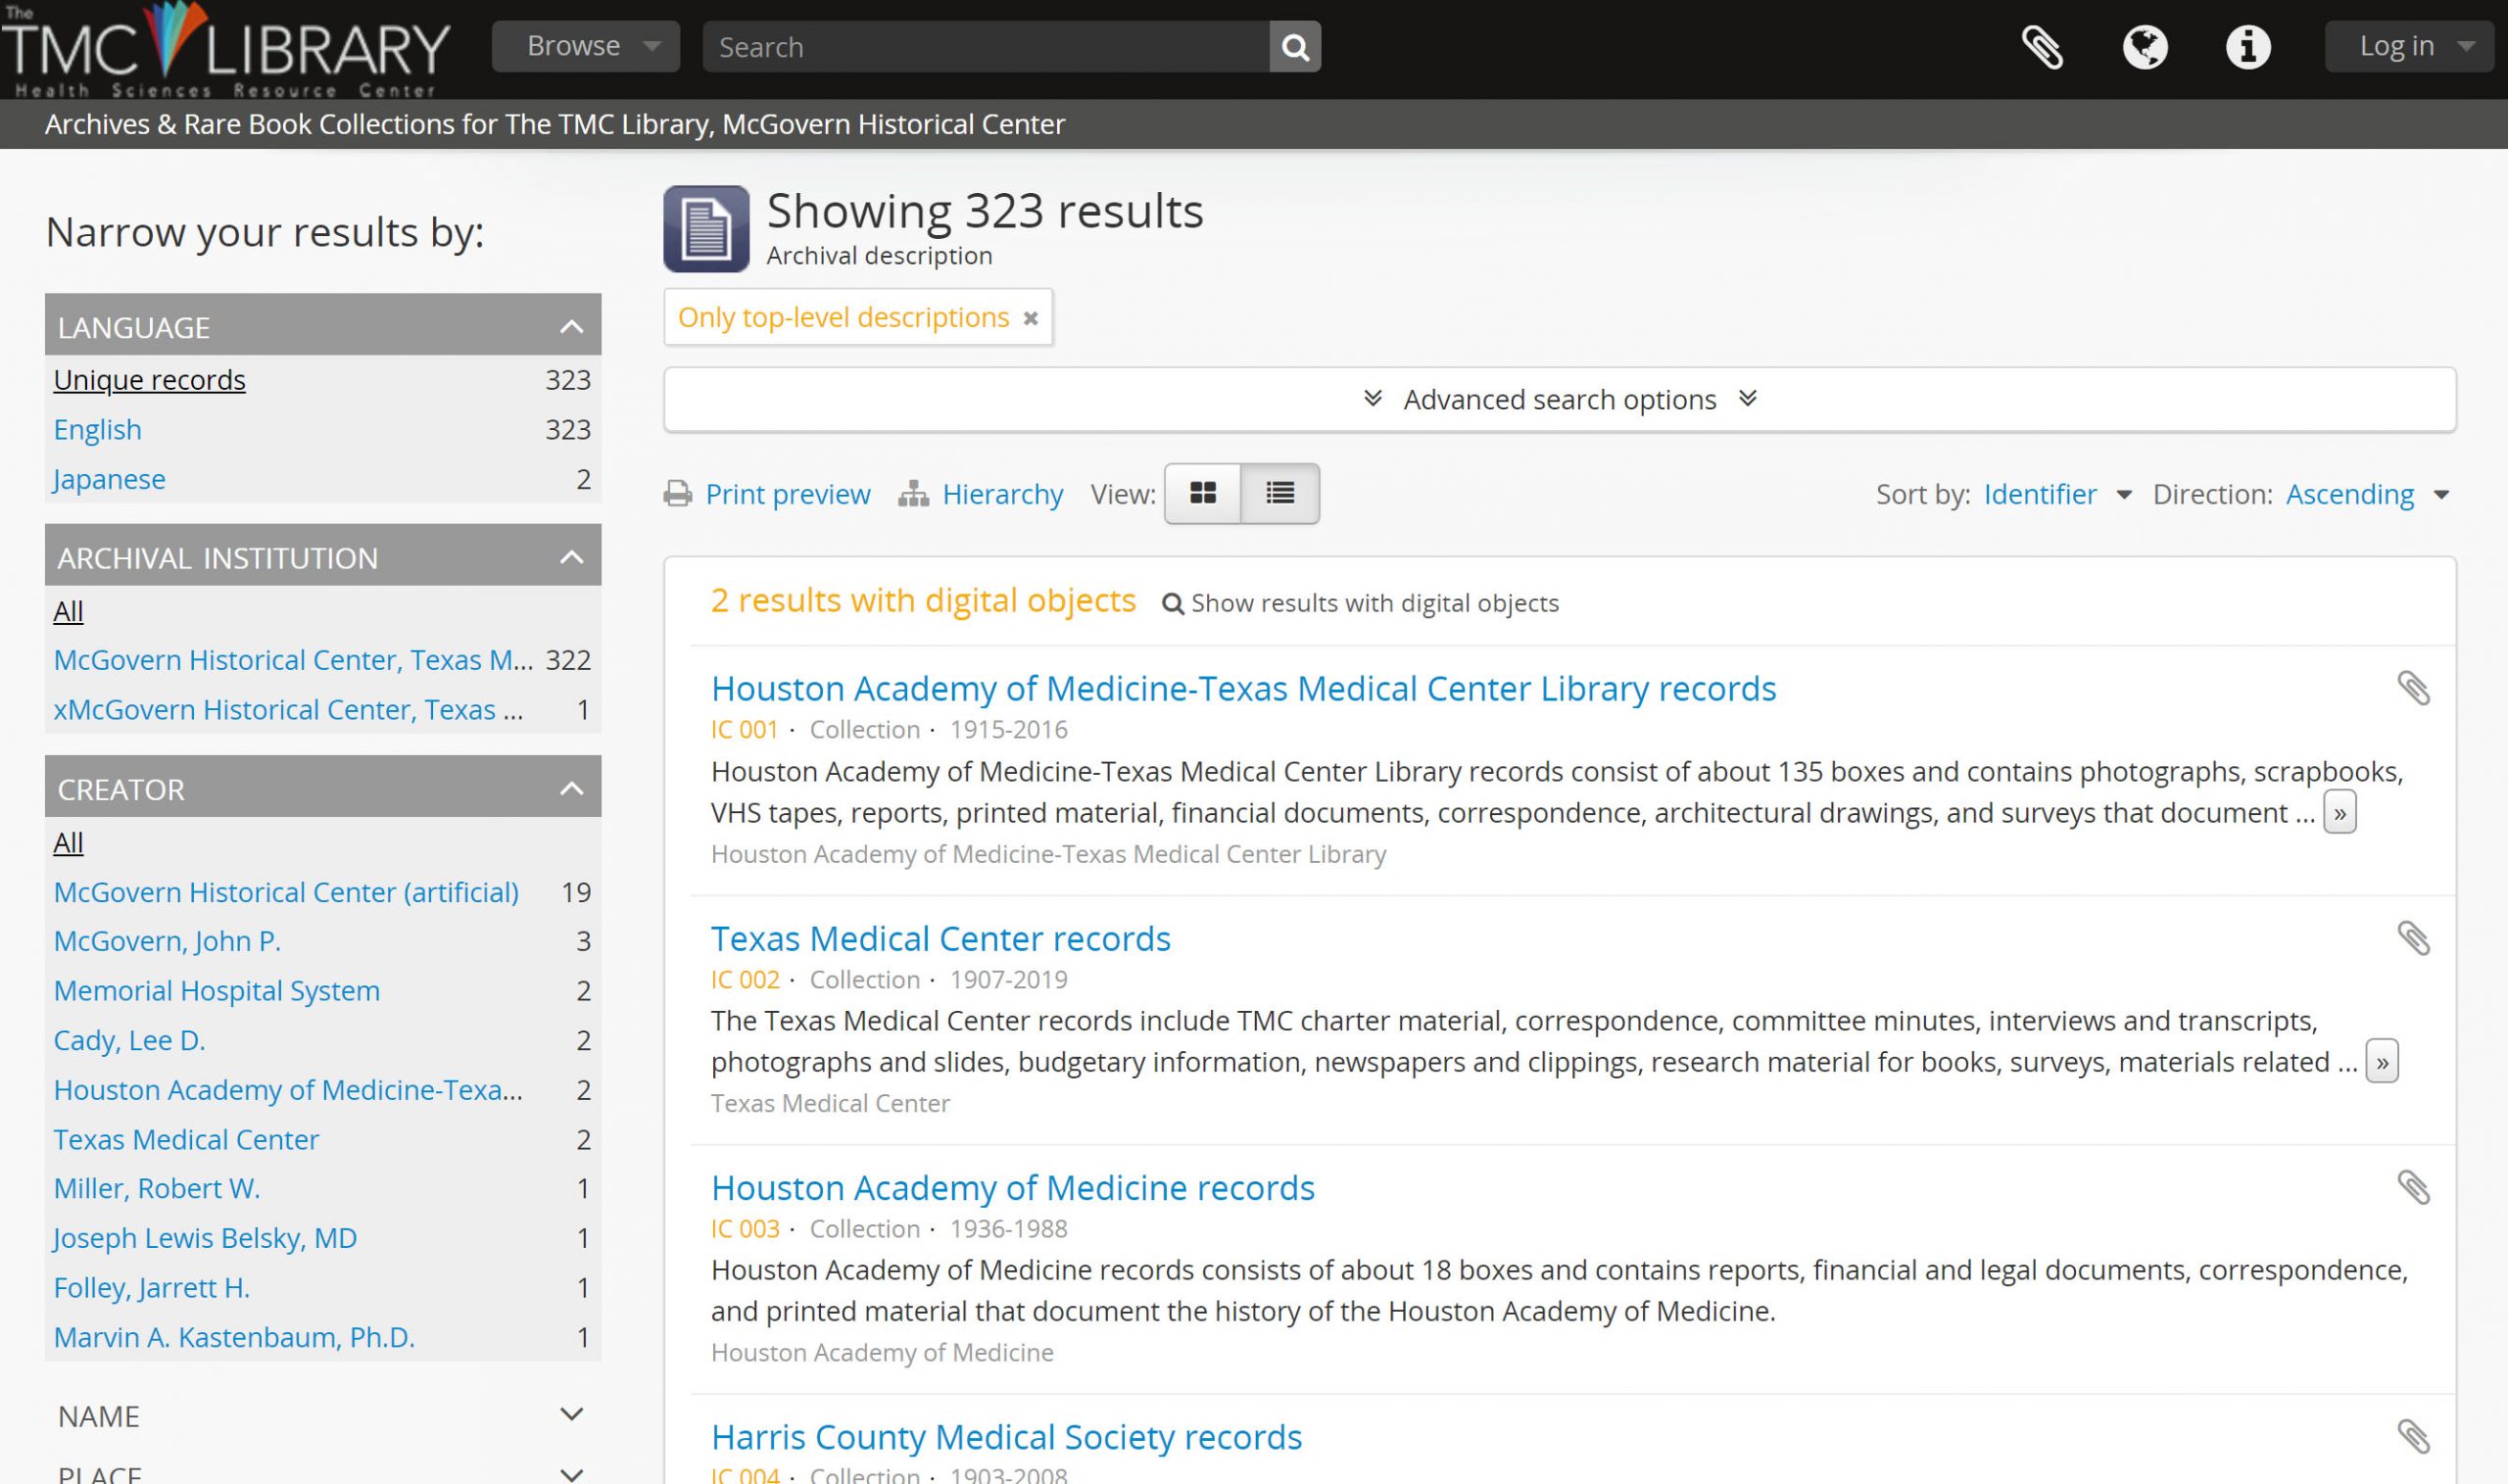 Image of The TMC Library, McGovern Historical Center’s collection search website list of collections.